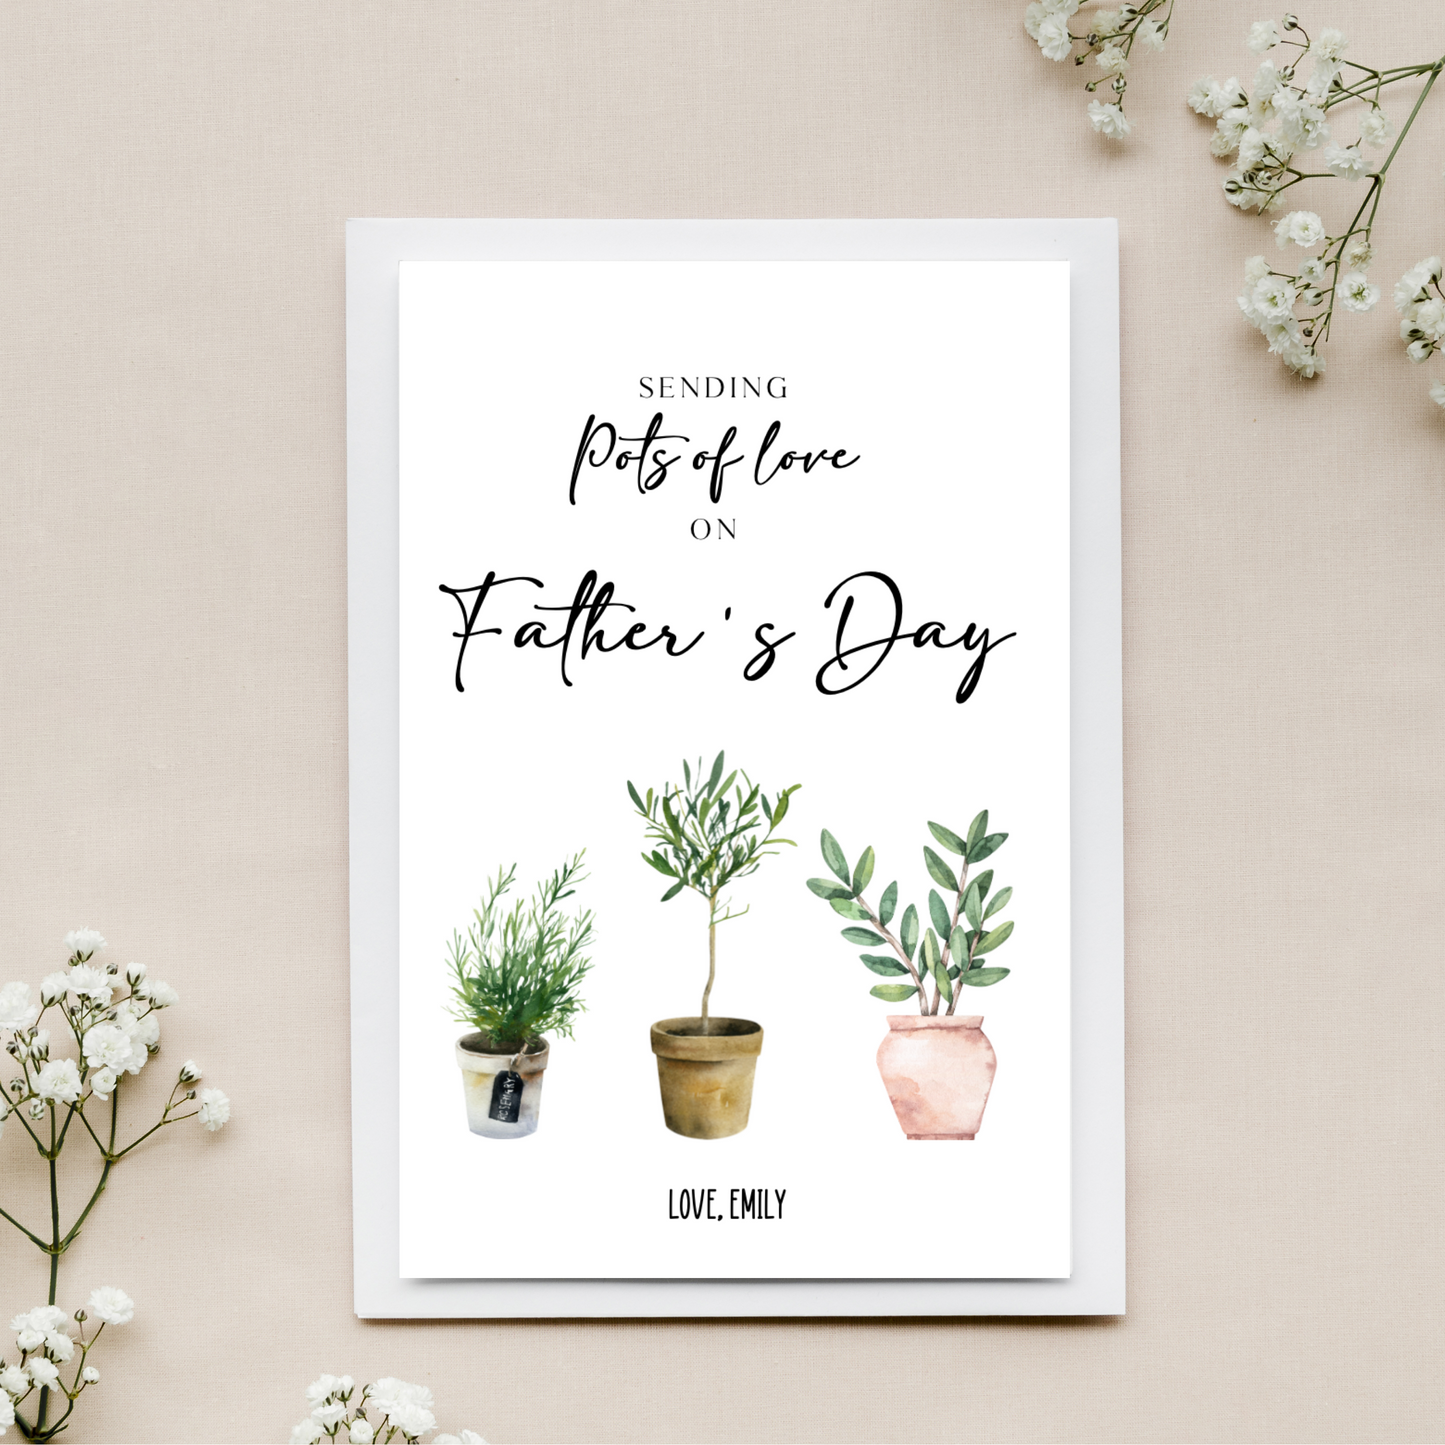 With Pots Of Love On Father's Day Card